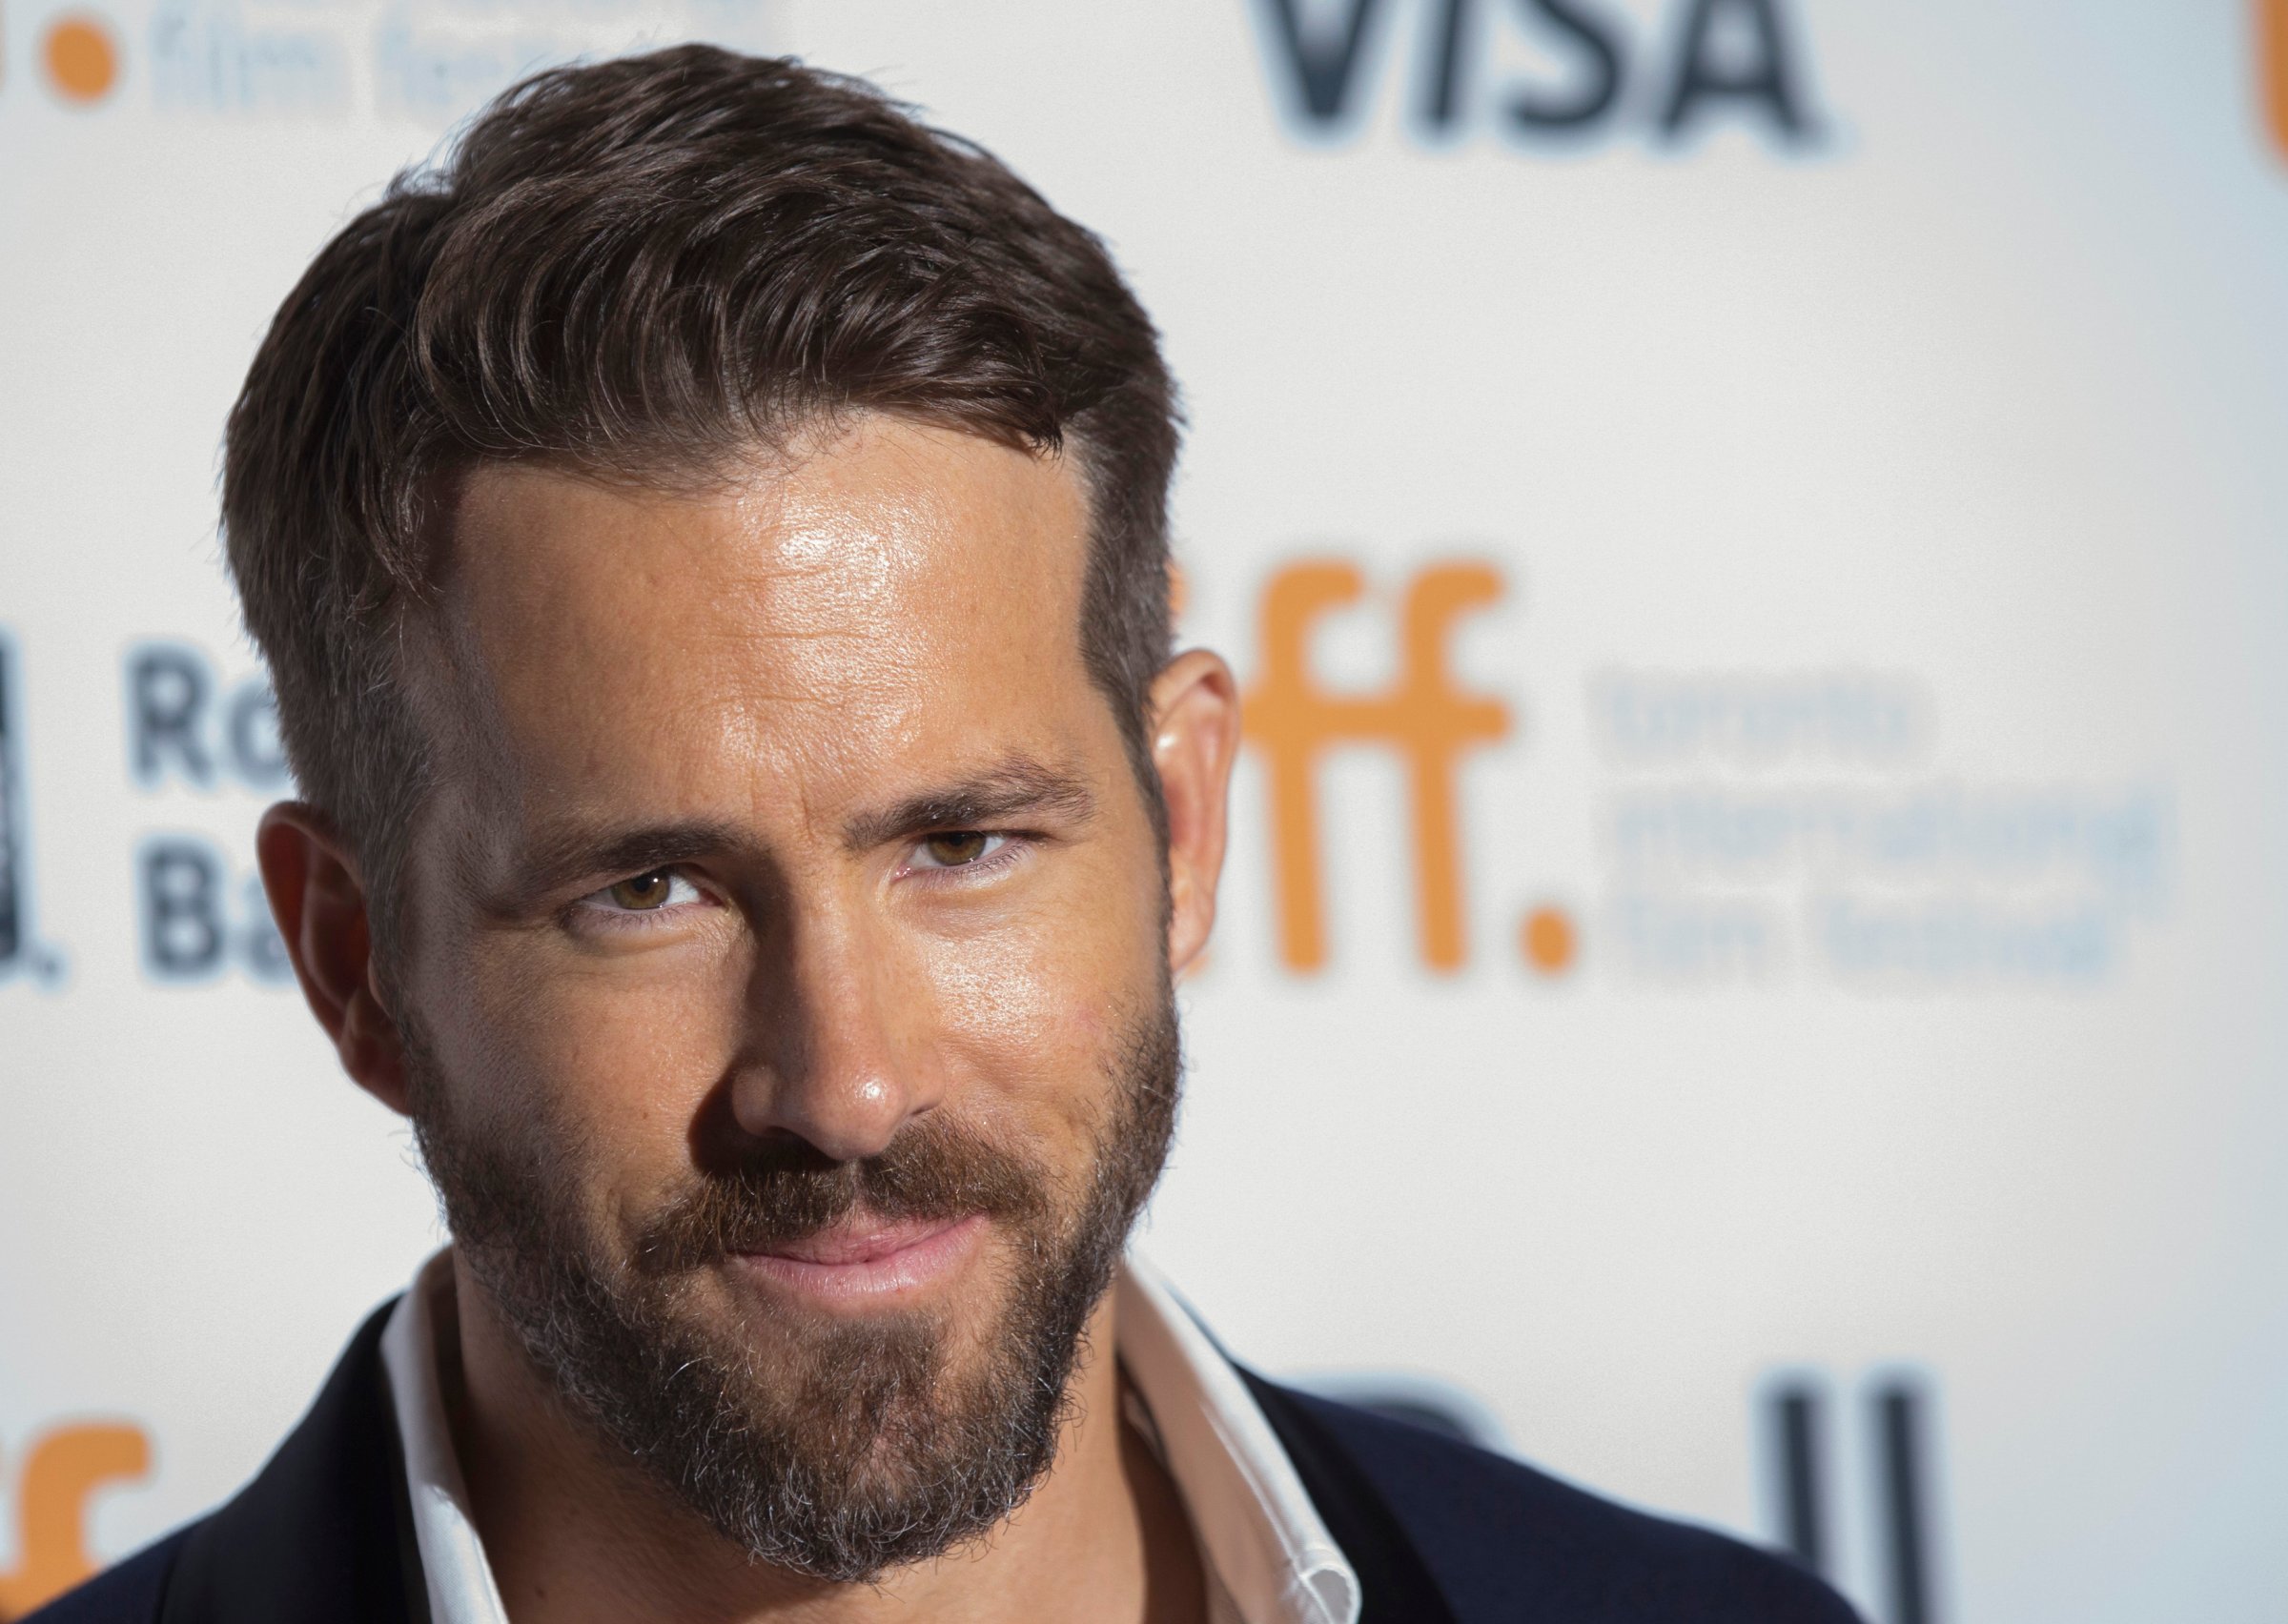 Cast member Ryan Reynolds arrives for the "The Voices" gala during the Toronto International Film Festival in Toronto on Sept. 11, 2014.